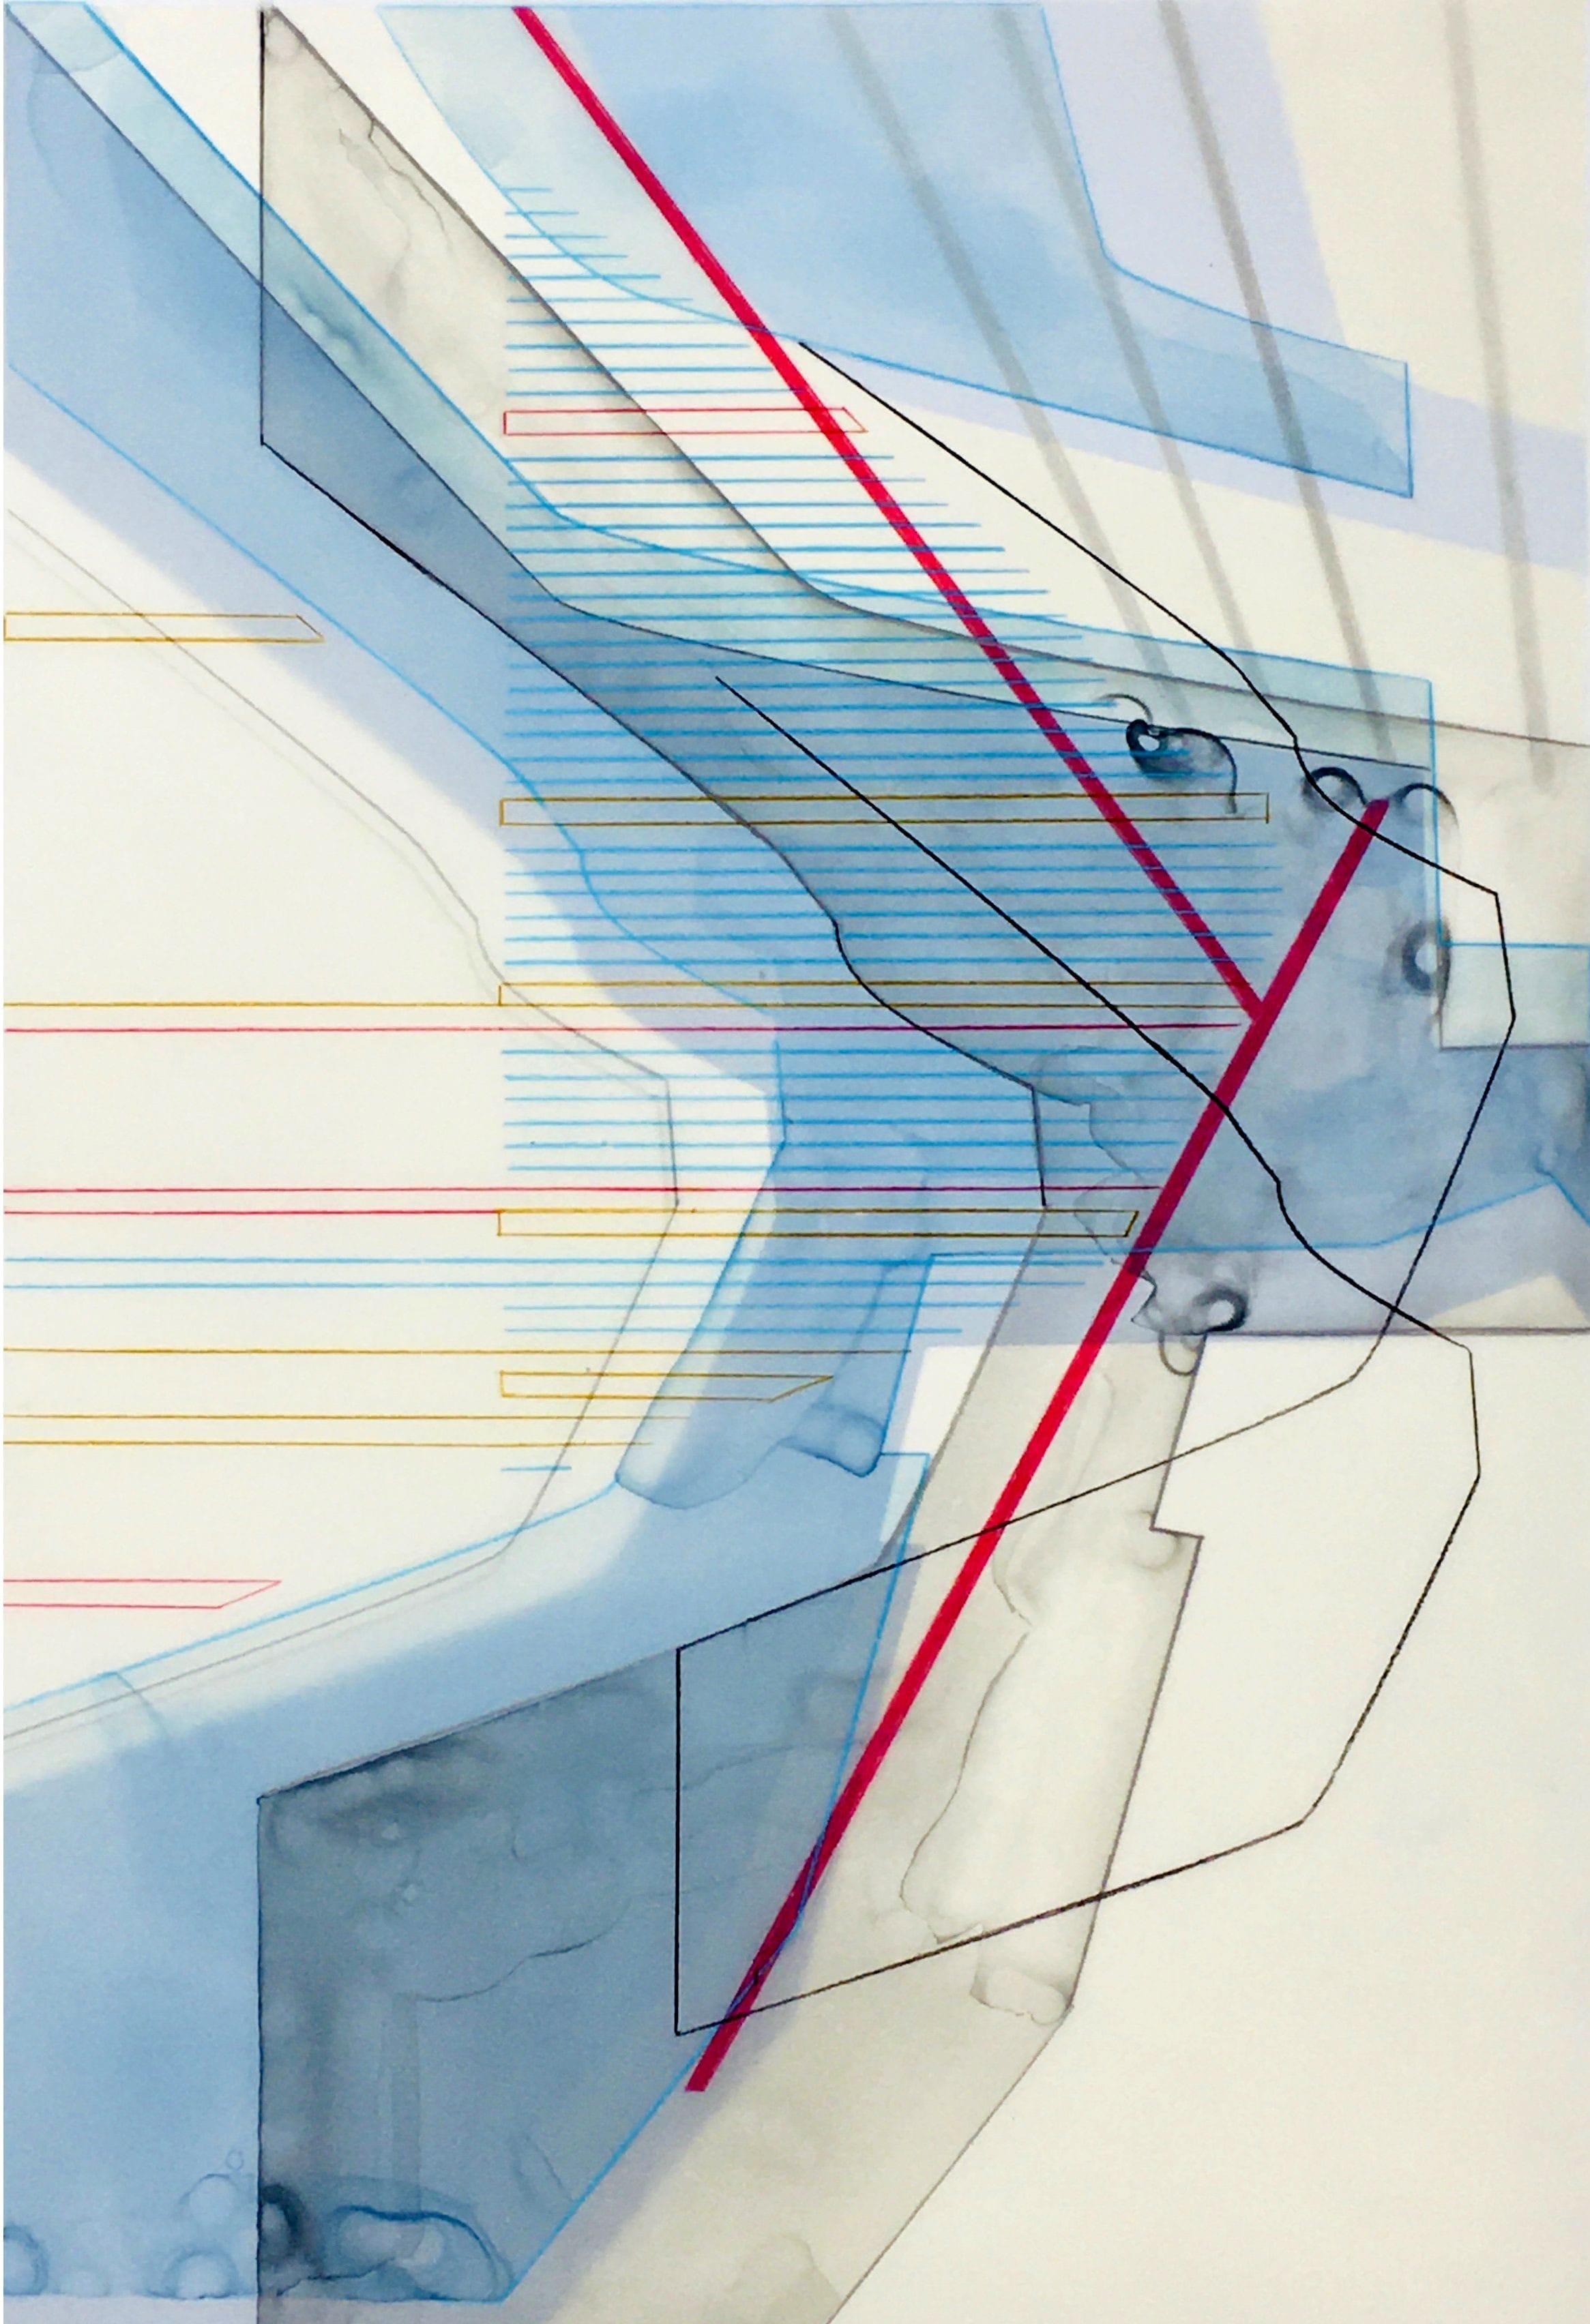 Rome, MAXXI#2
Ink and colored pencil on Mylar mounted on gouache on paper. 
19x13 inches, 2020